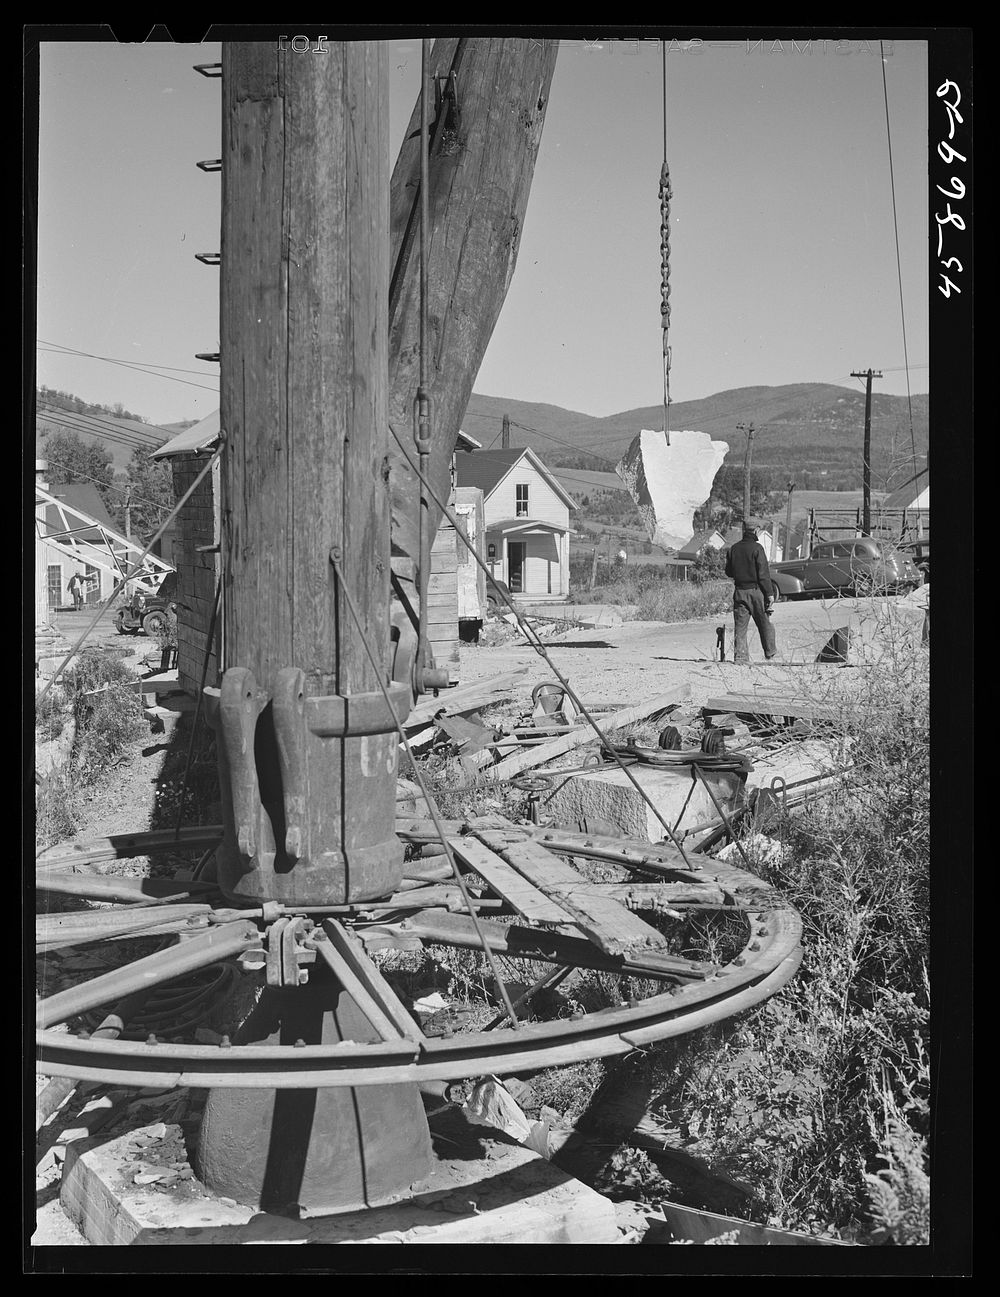 Part of a derrick at the Wells-Lemson quarry. Sourced from the Library of Congress.